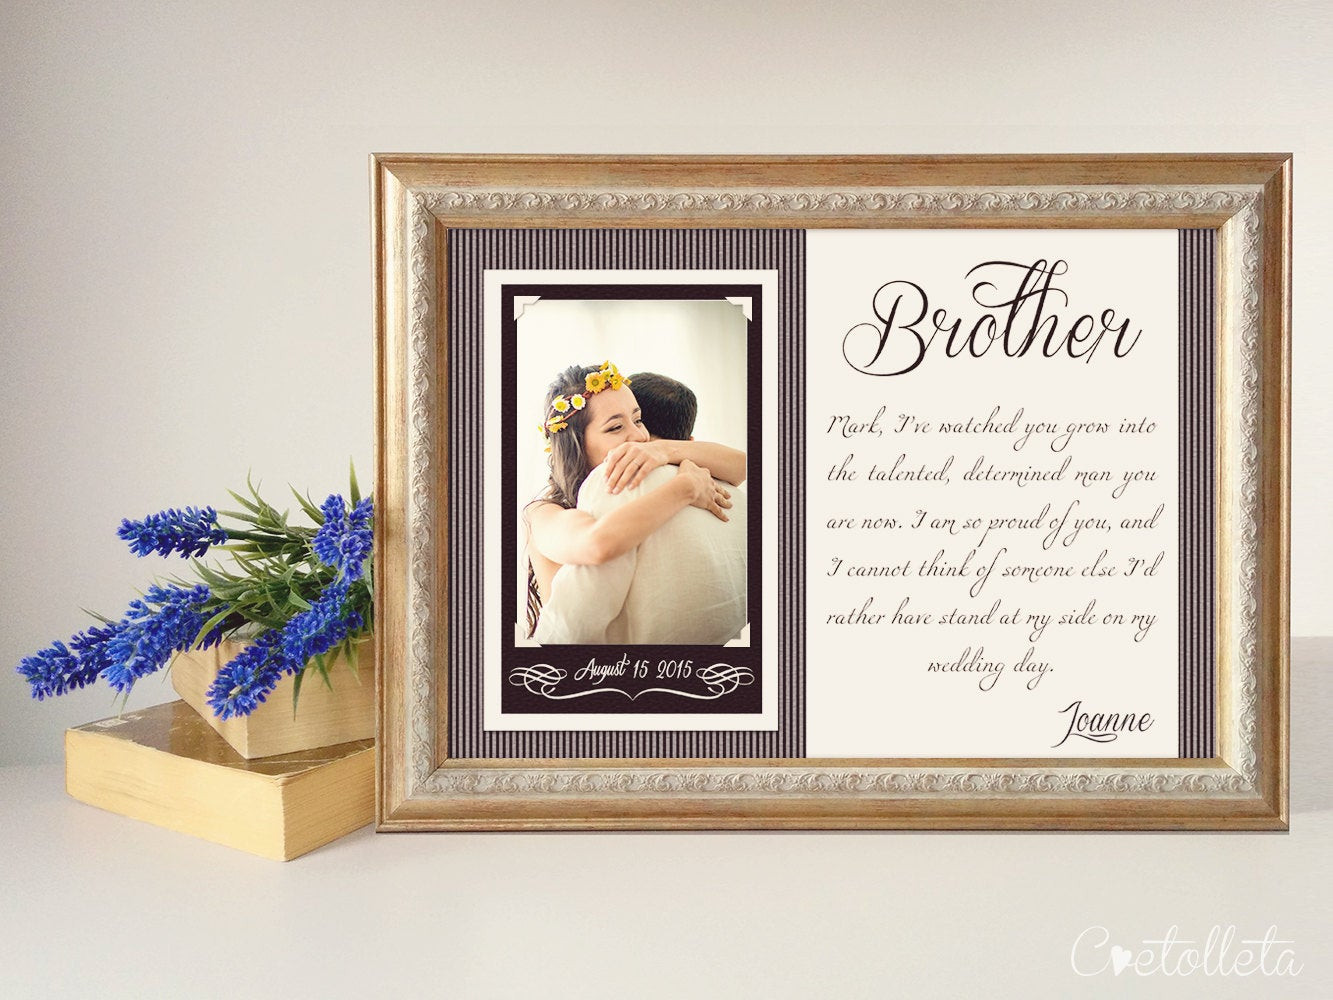 Wedding Gift Ideas For Brother
 Brother Wedding Gift Best Friend Thank You t by Cvetolleta